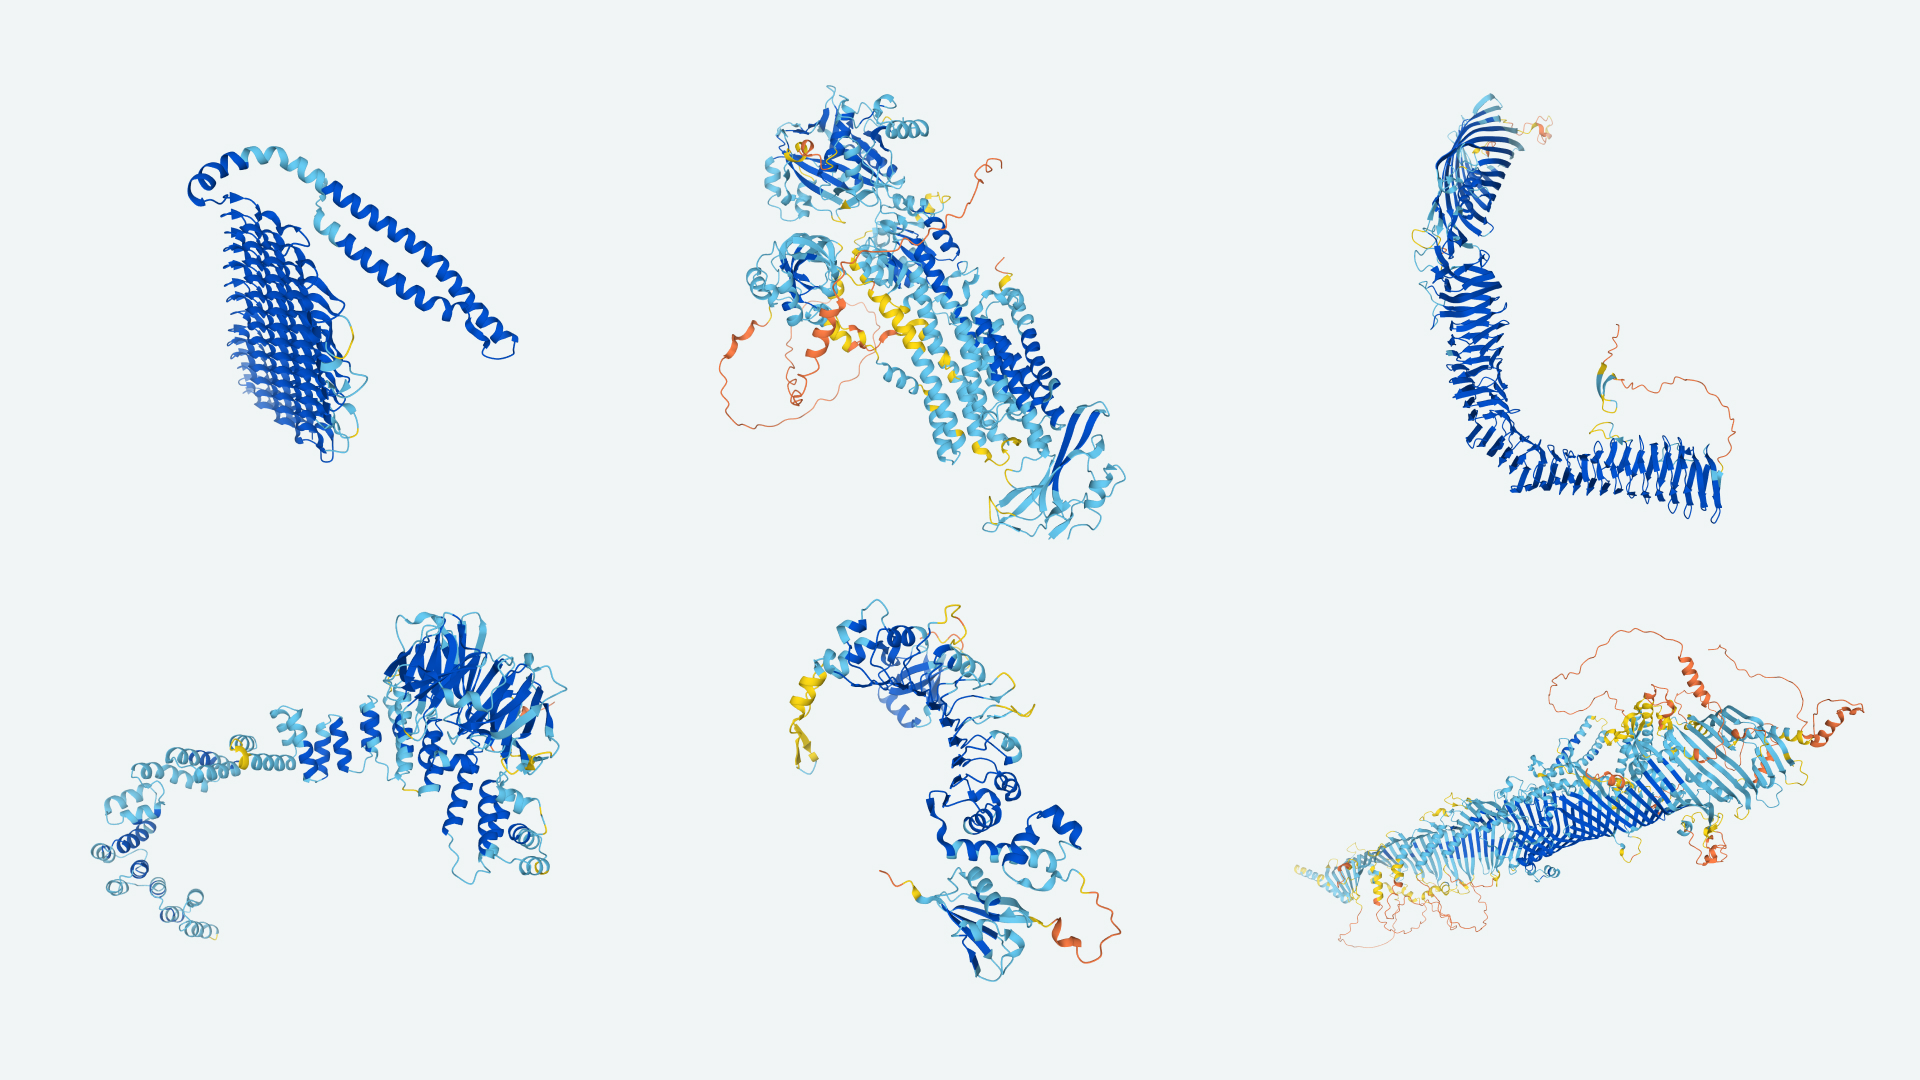 Examples of protein structures predicted by AlphaFold